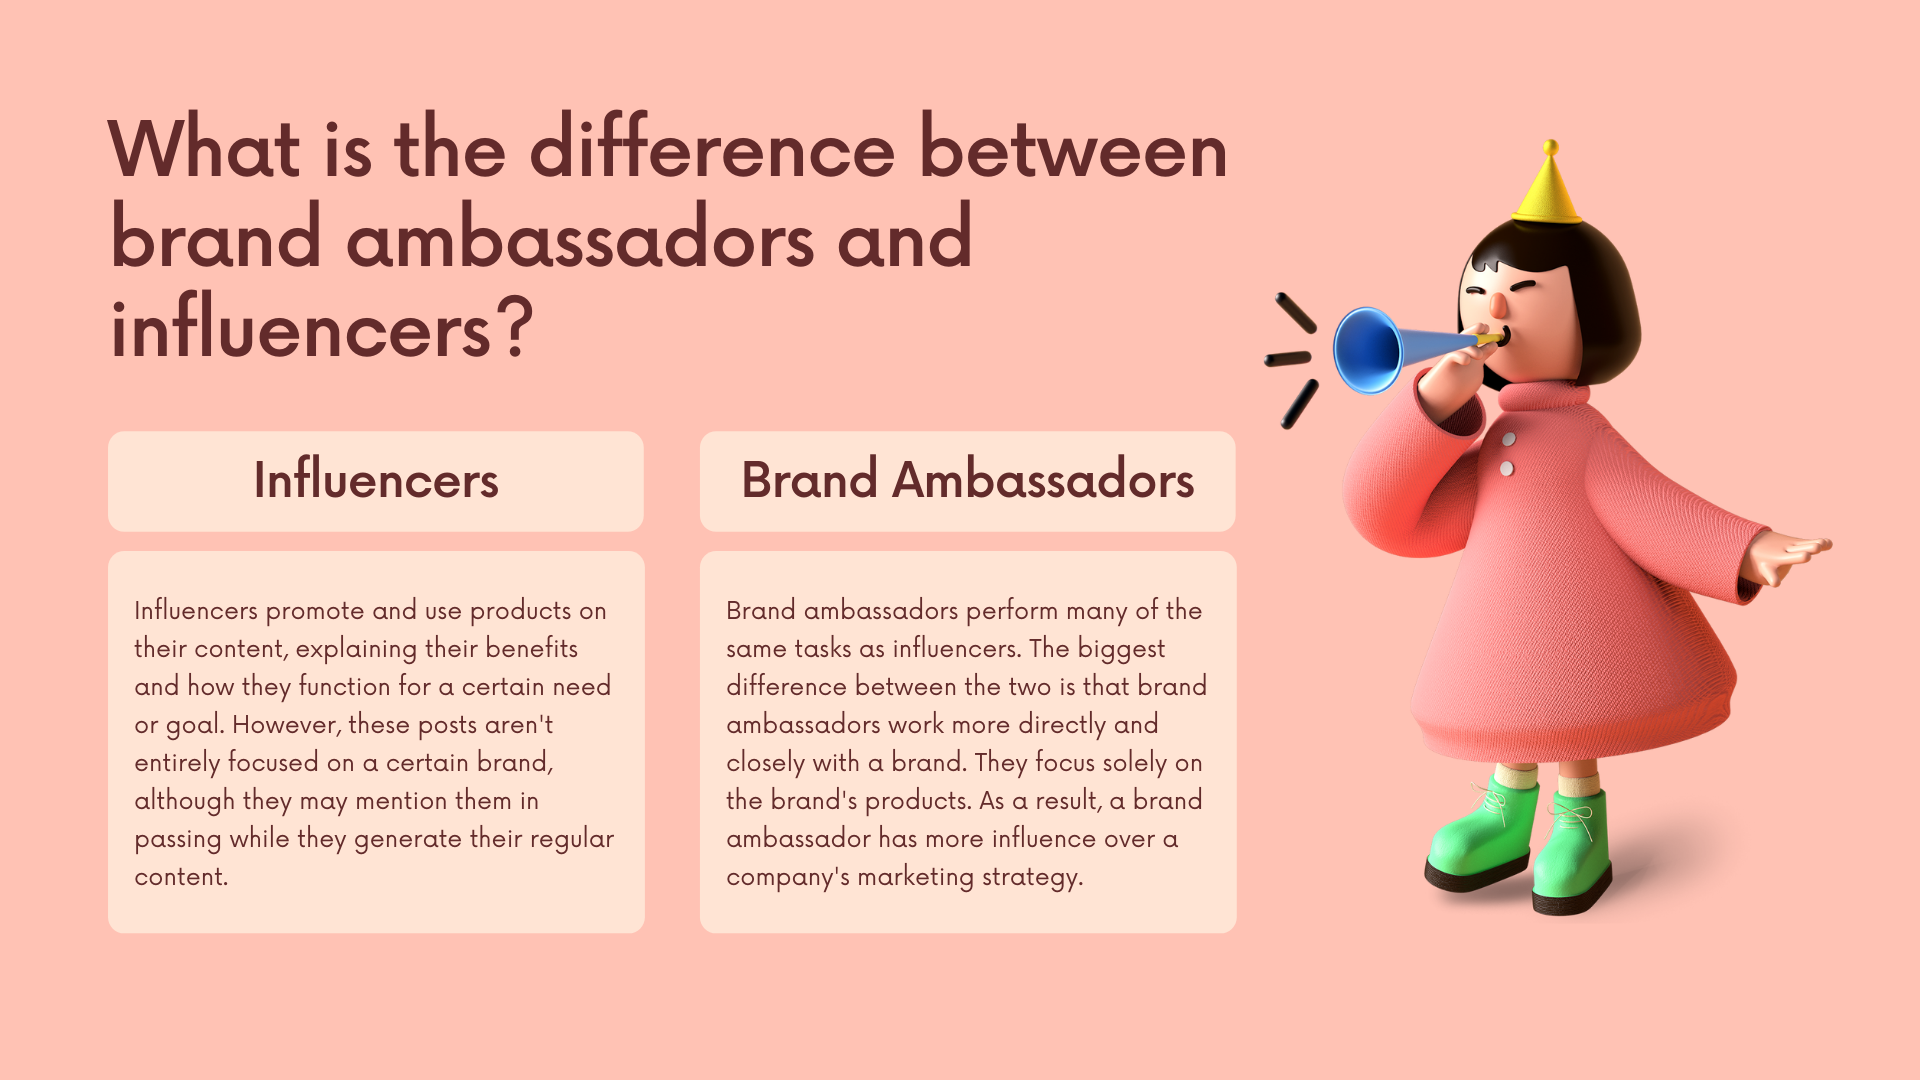 So, You Want to Be a Brand Ambassador?